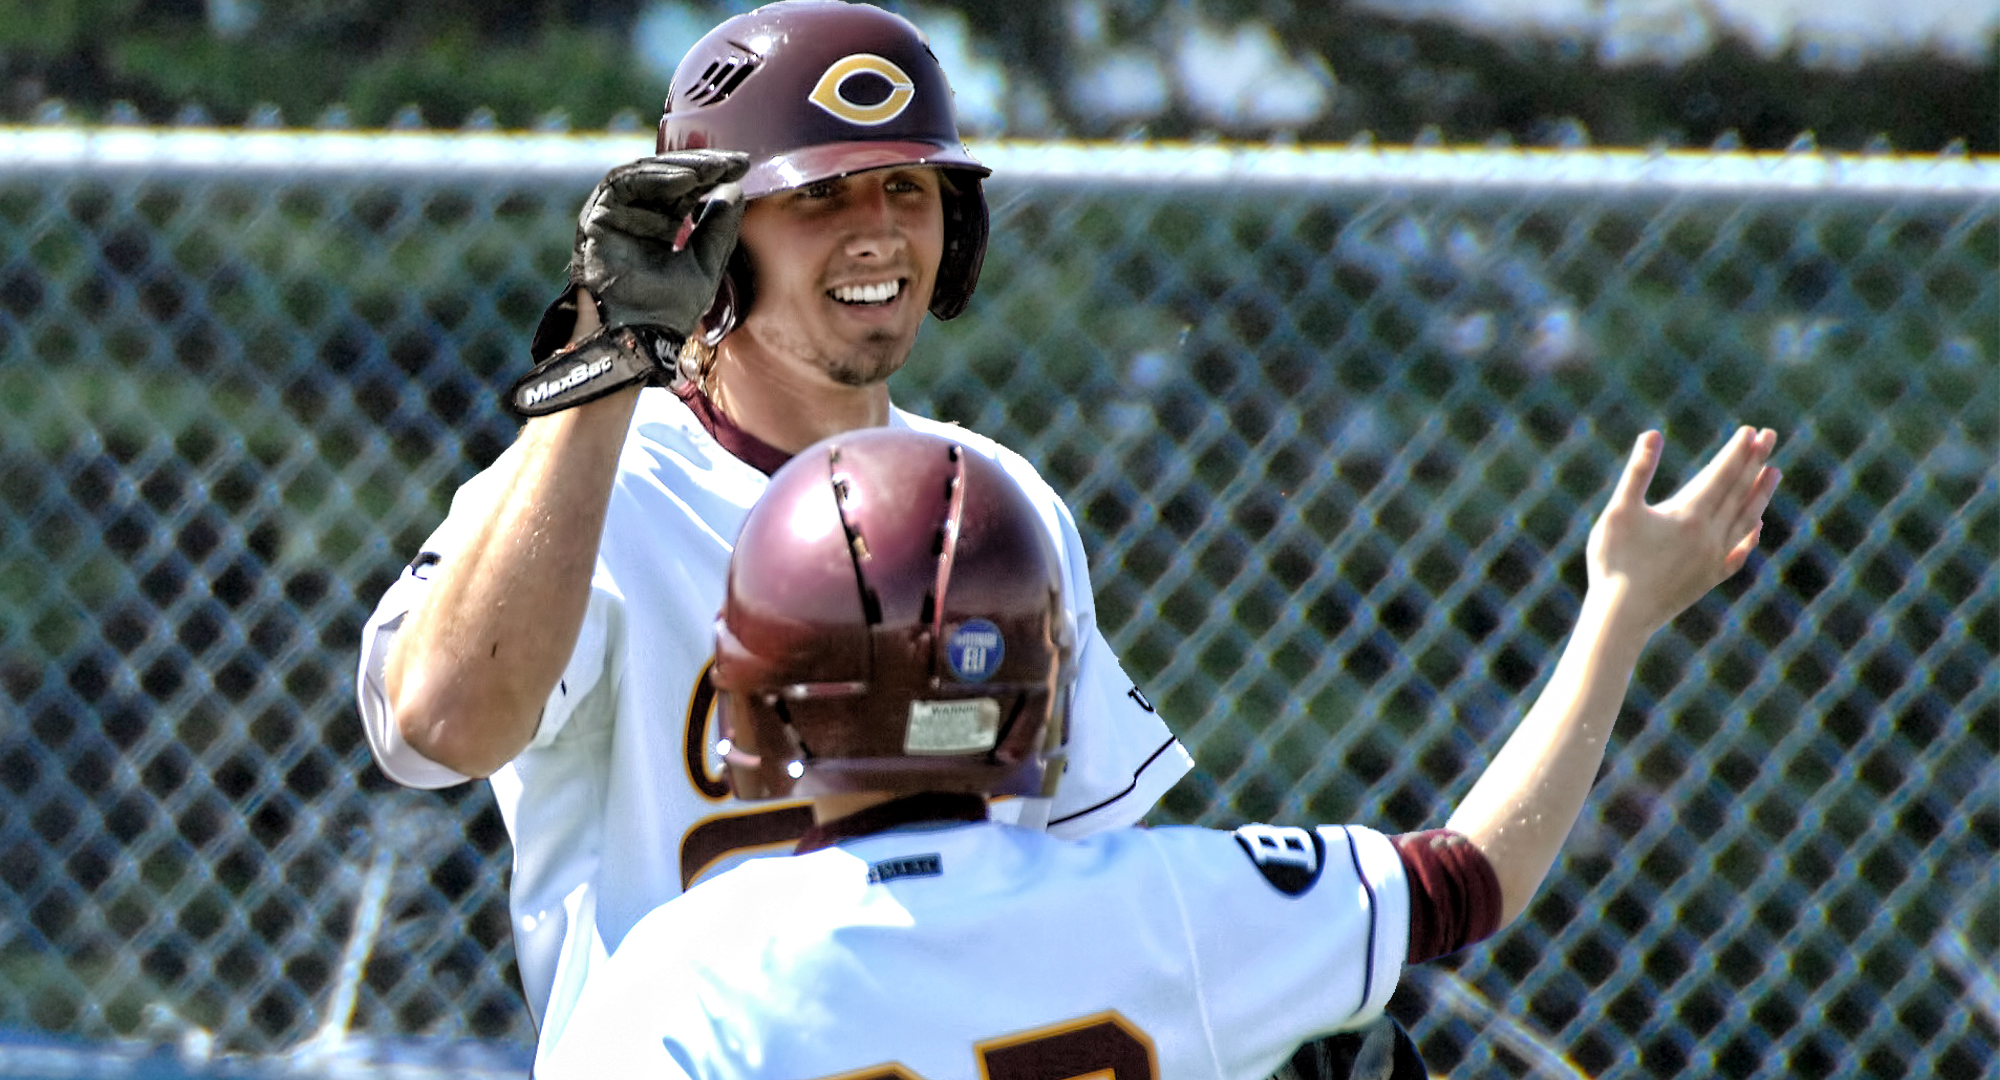 Austin Ver Steeg pitched a complete-game shutout and hit the game-winning home run in the Cobbers' 2-0 Game 1 win over Pitt.-Greensburg.